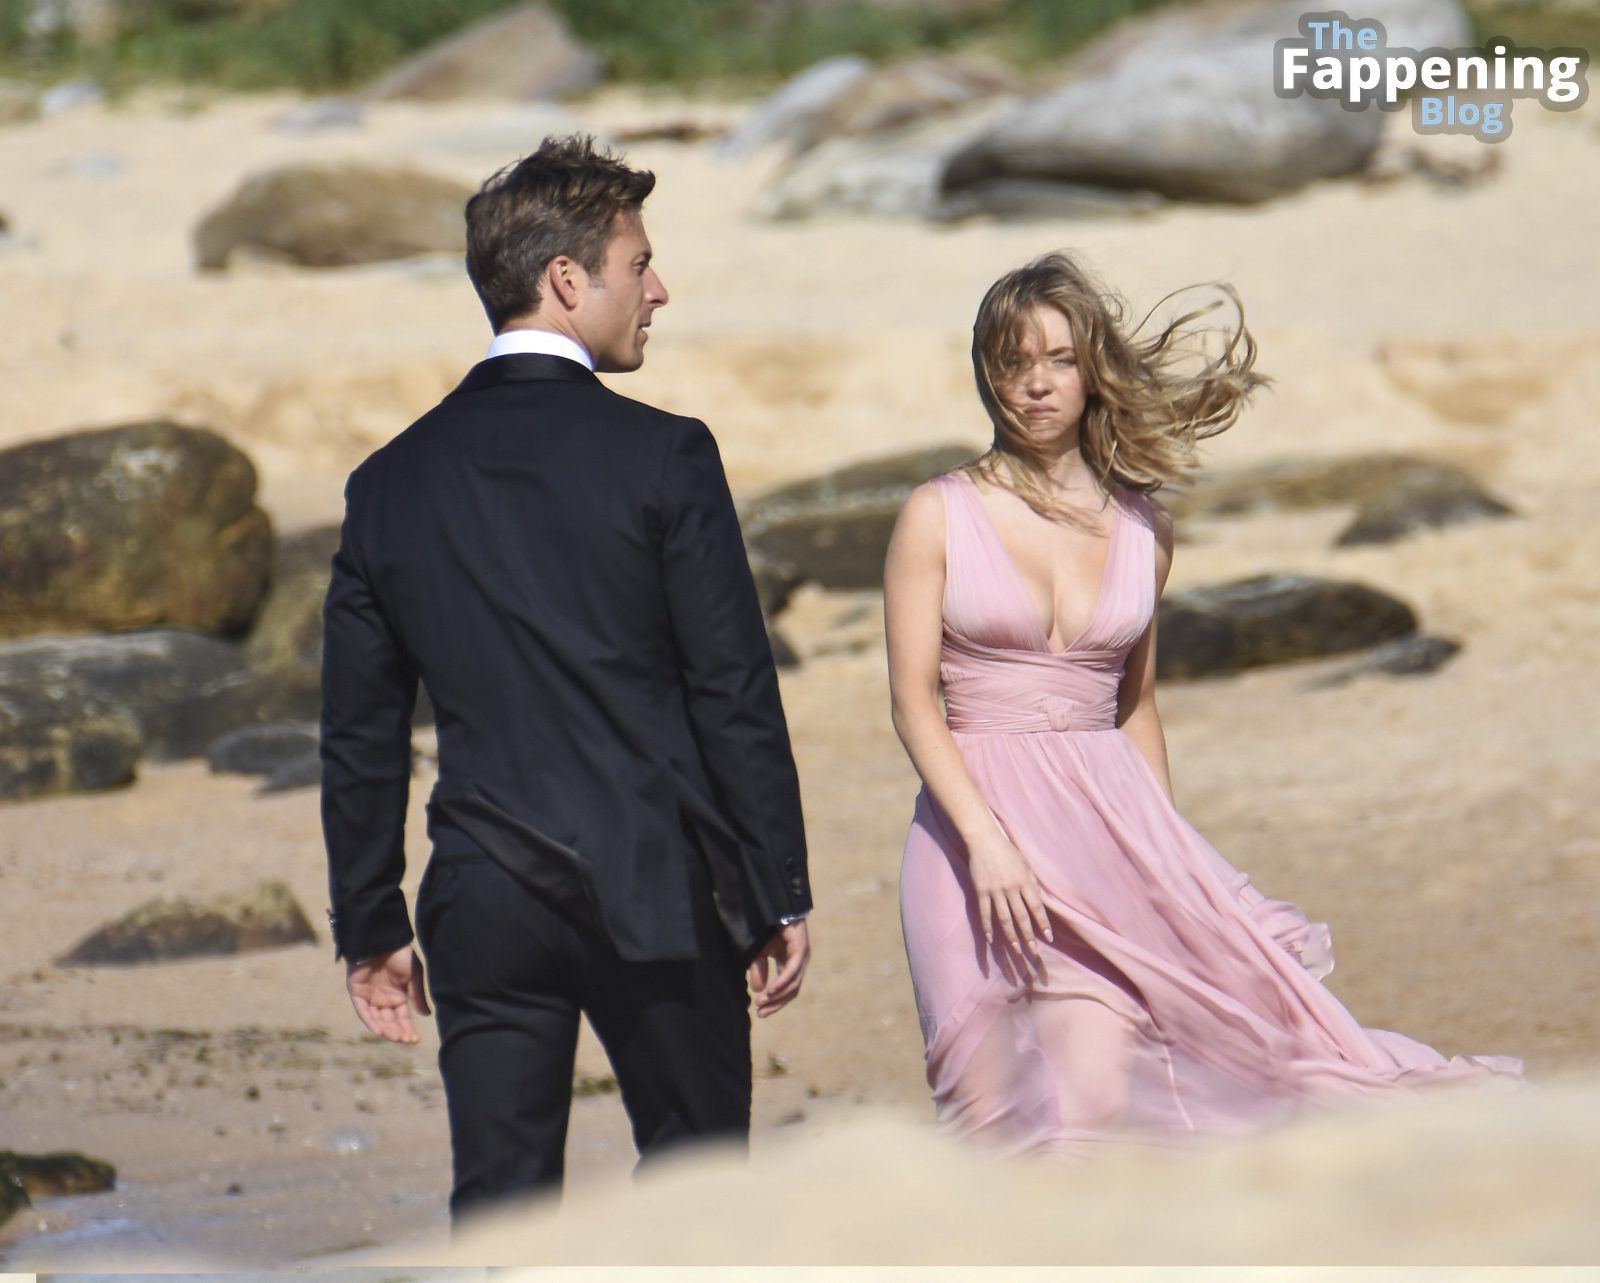 Busty Sydney Sweeney Looks Hot in a Pink Dress on Set (14 Photos)